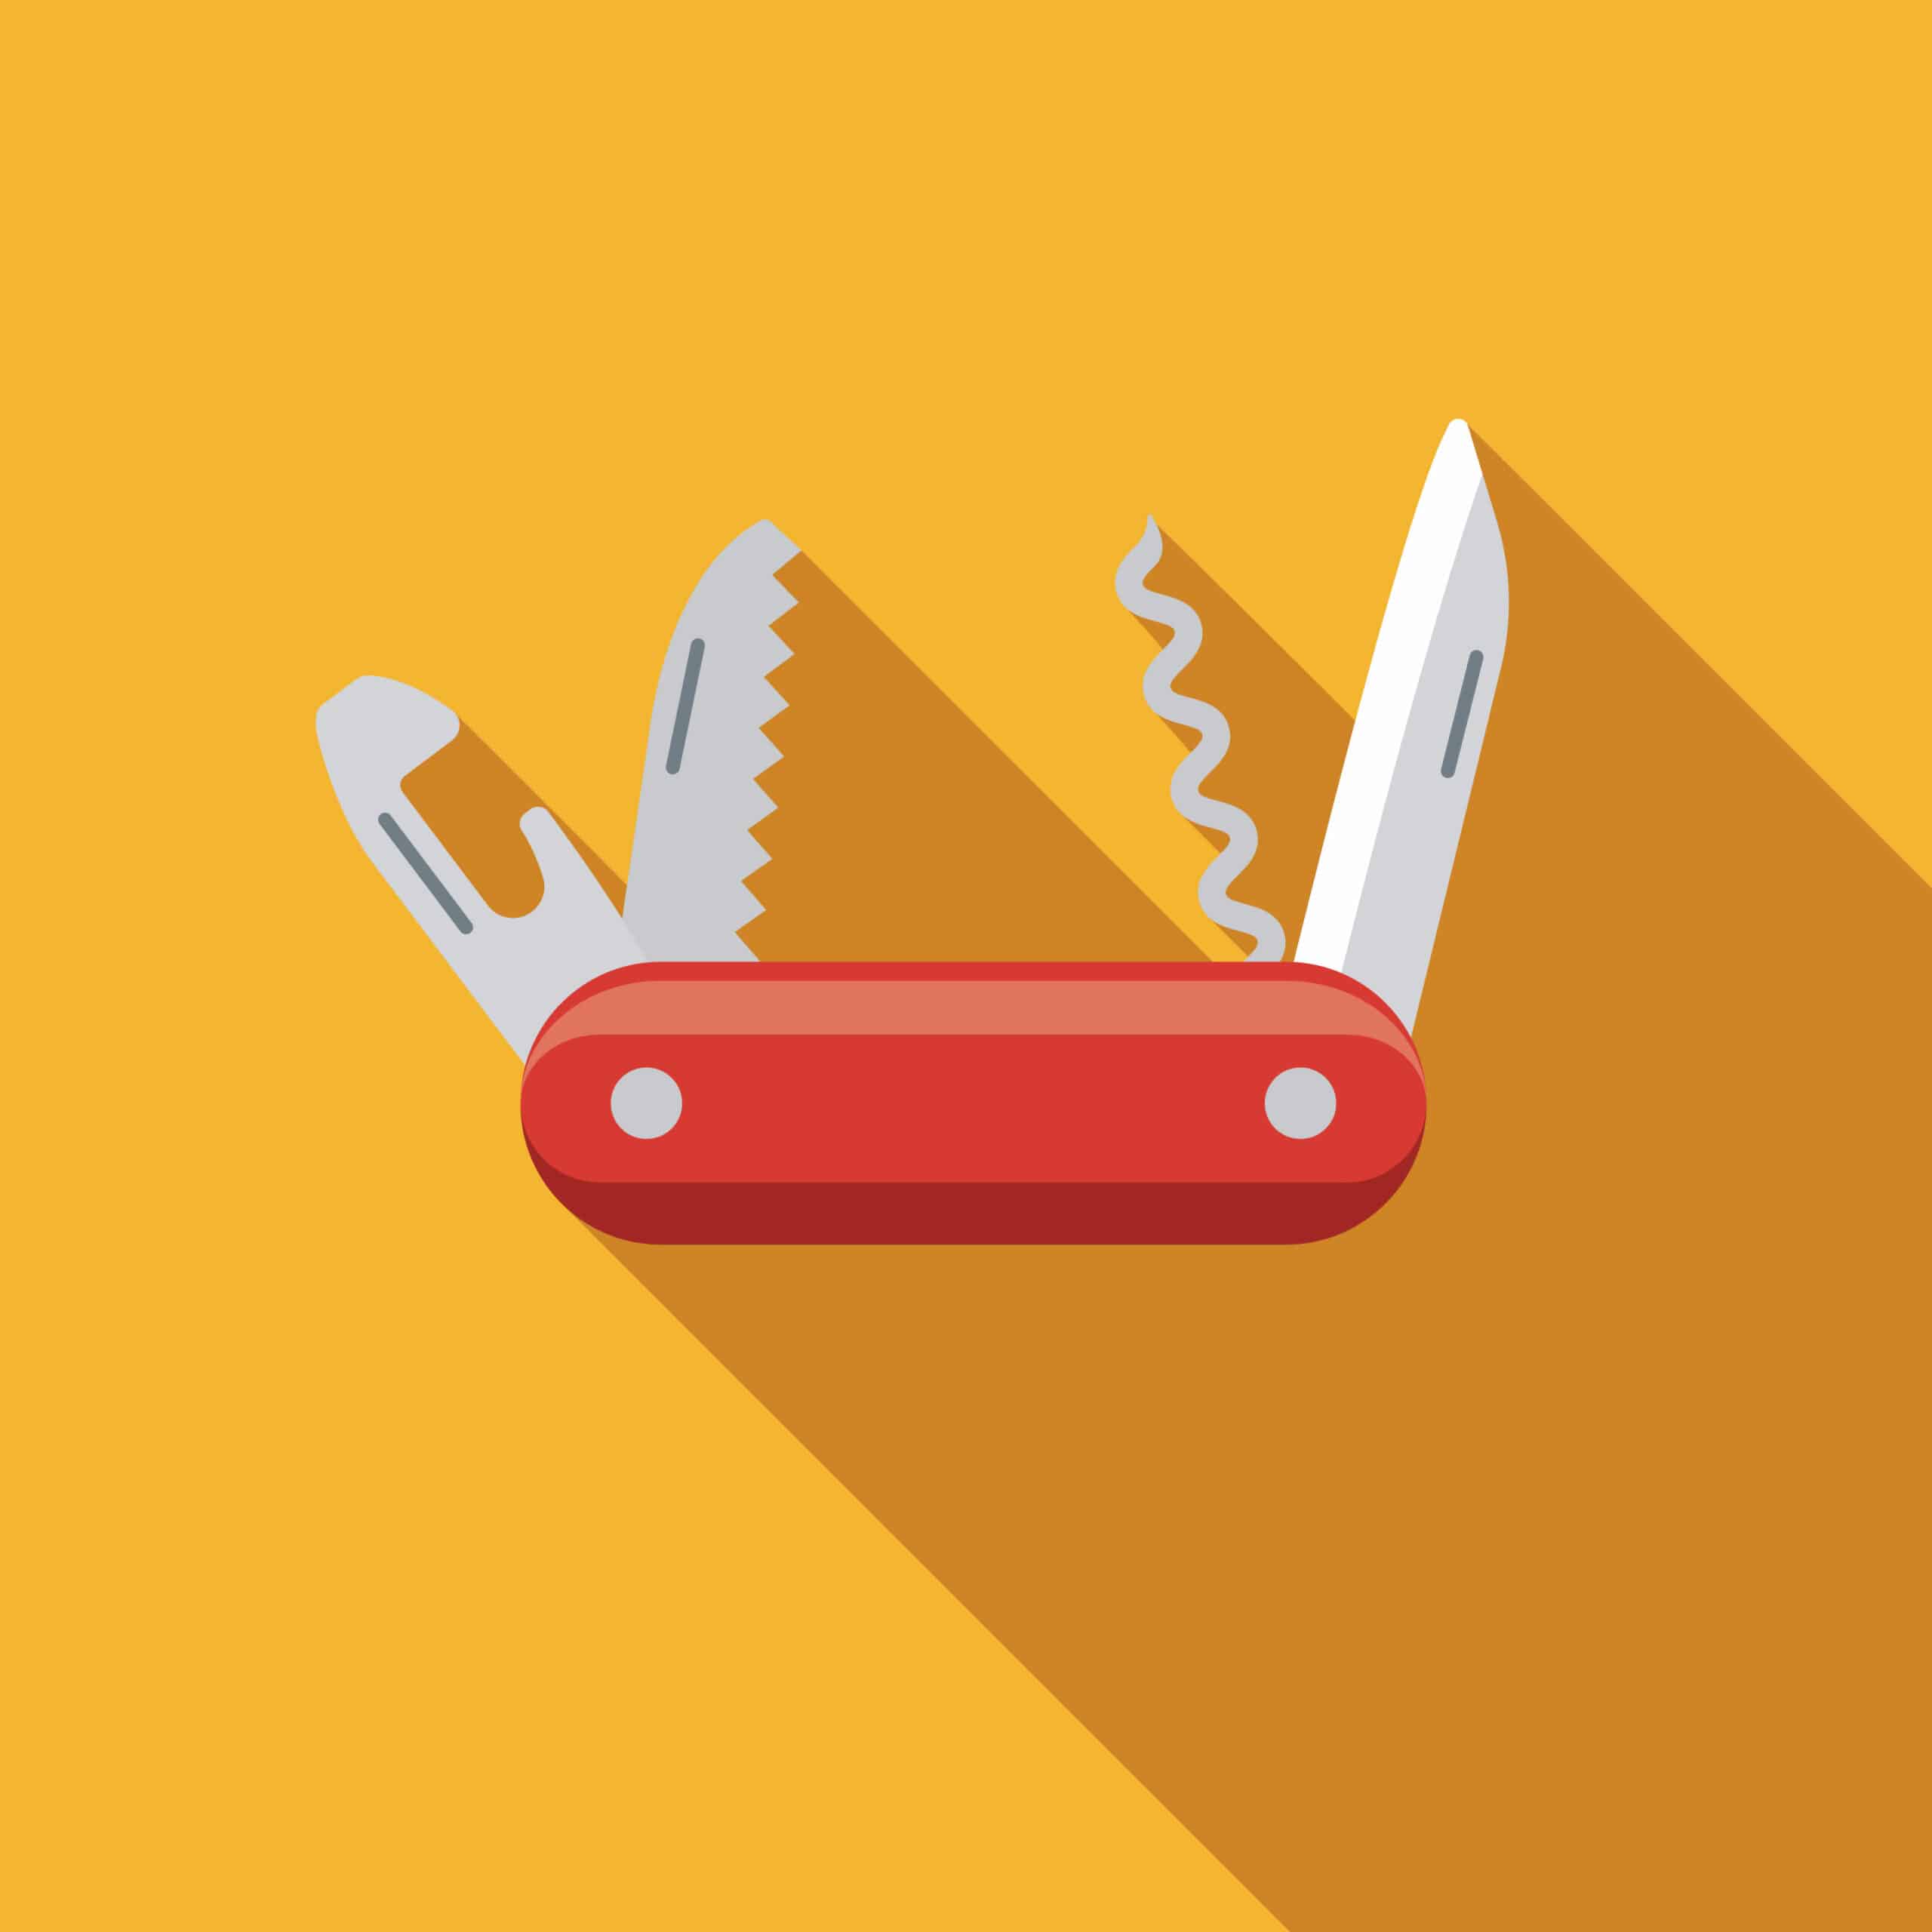 Swiss Army Knife cybersecurity managed IT services